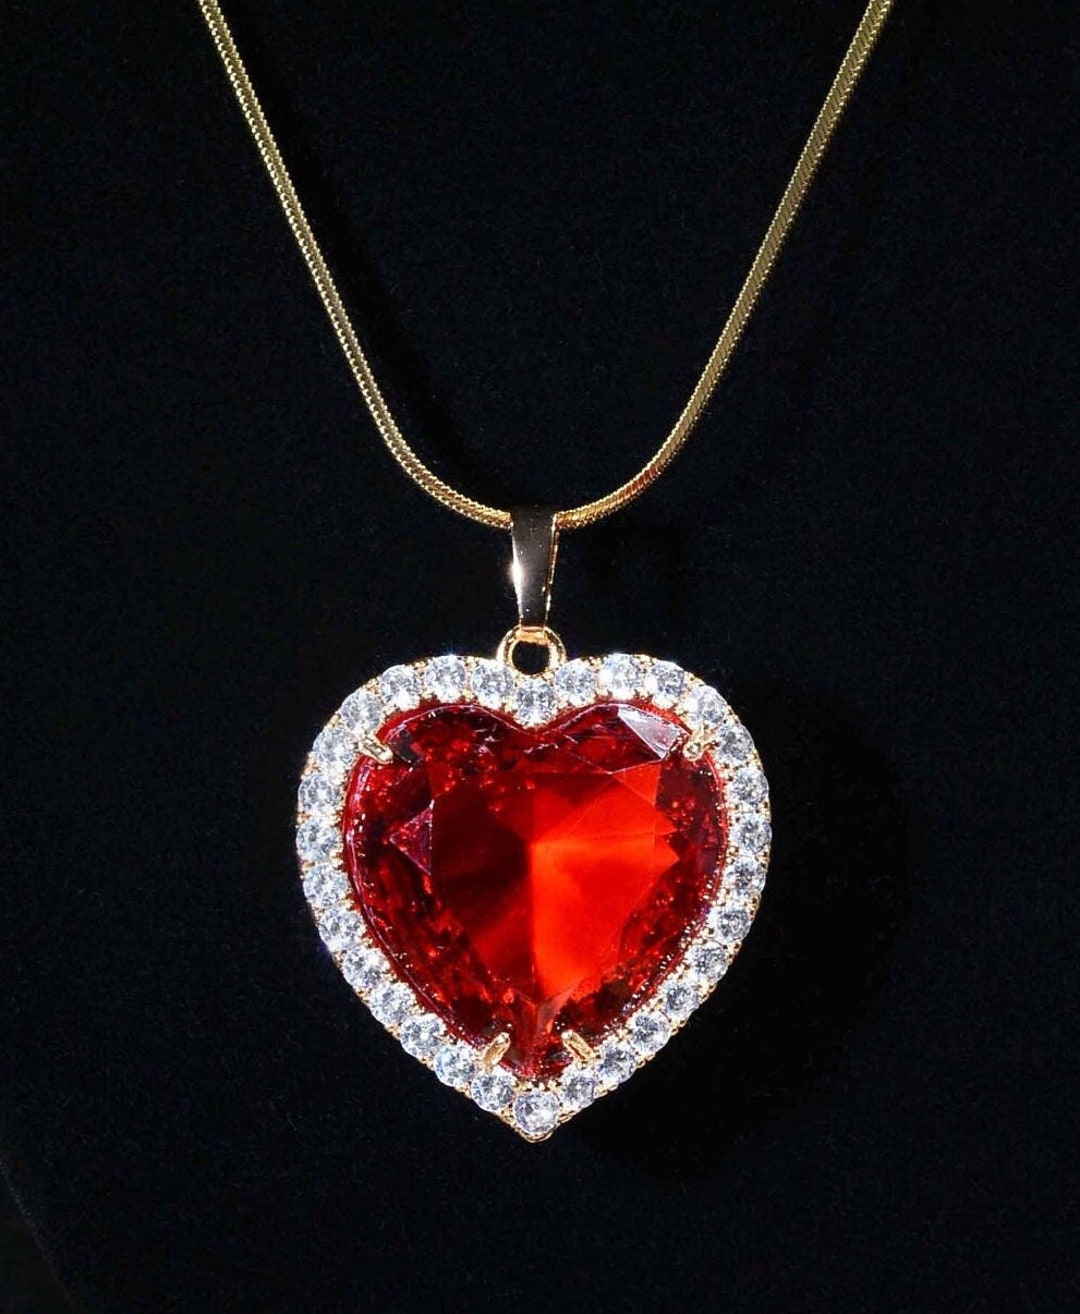 My Heart Will Go on Large Red Heart Charm Necklace Titanic - Etsy